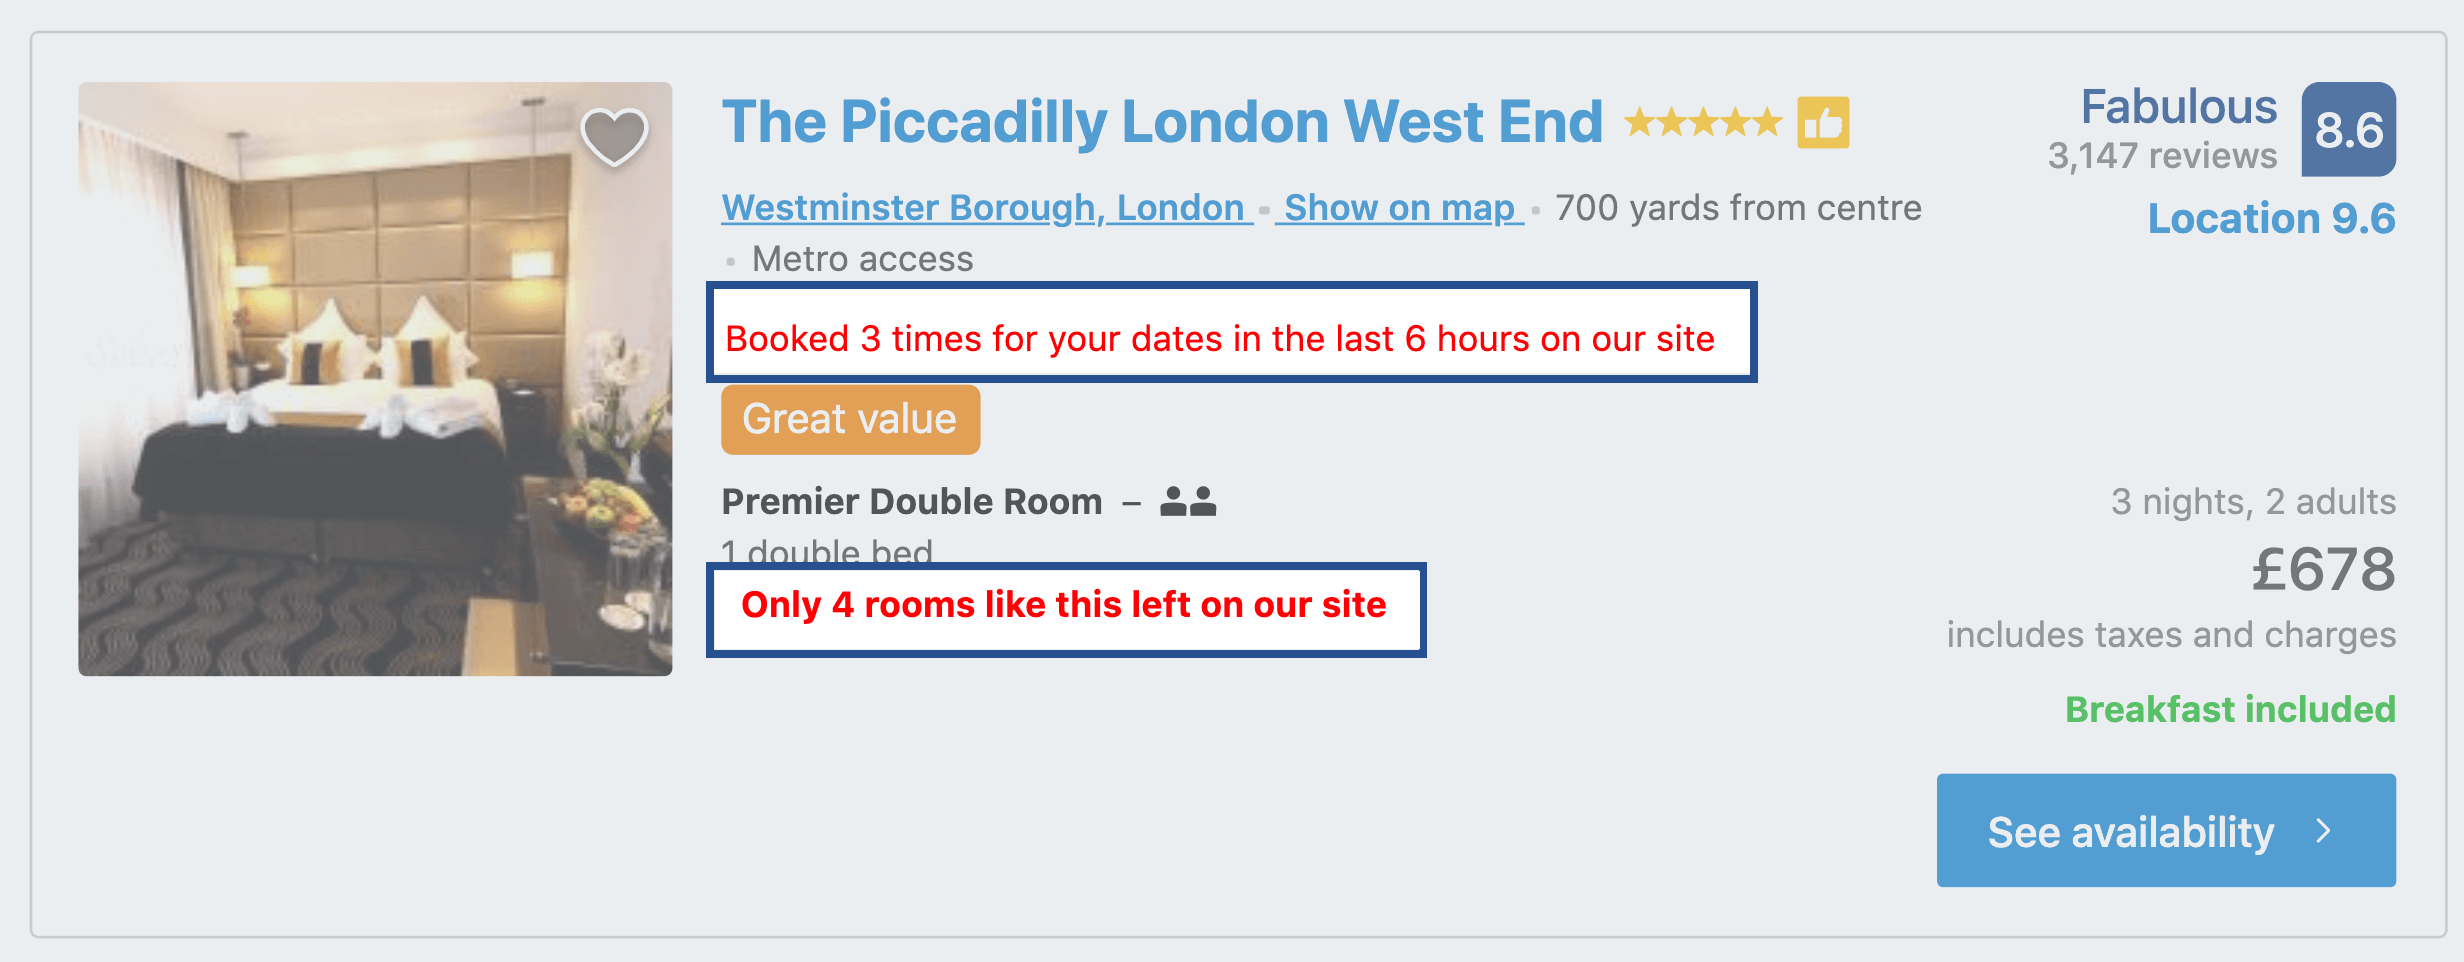 Example of social proof on a hotel booking website